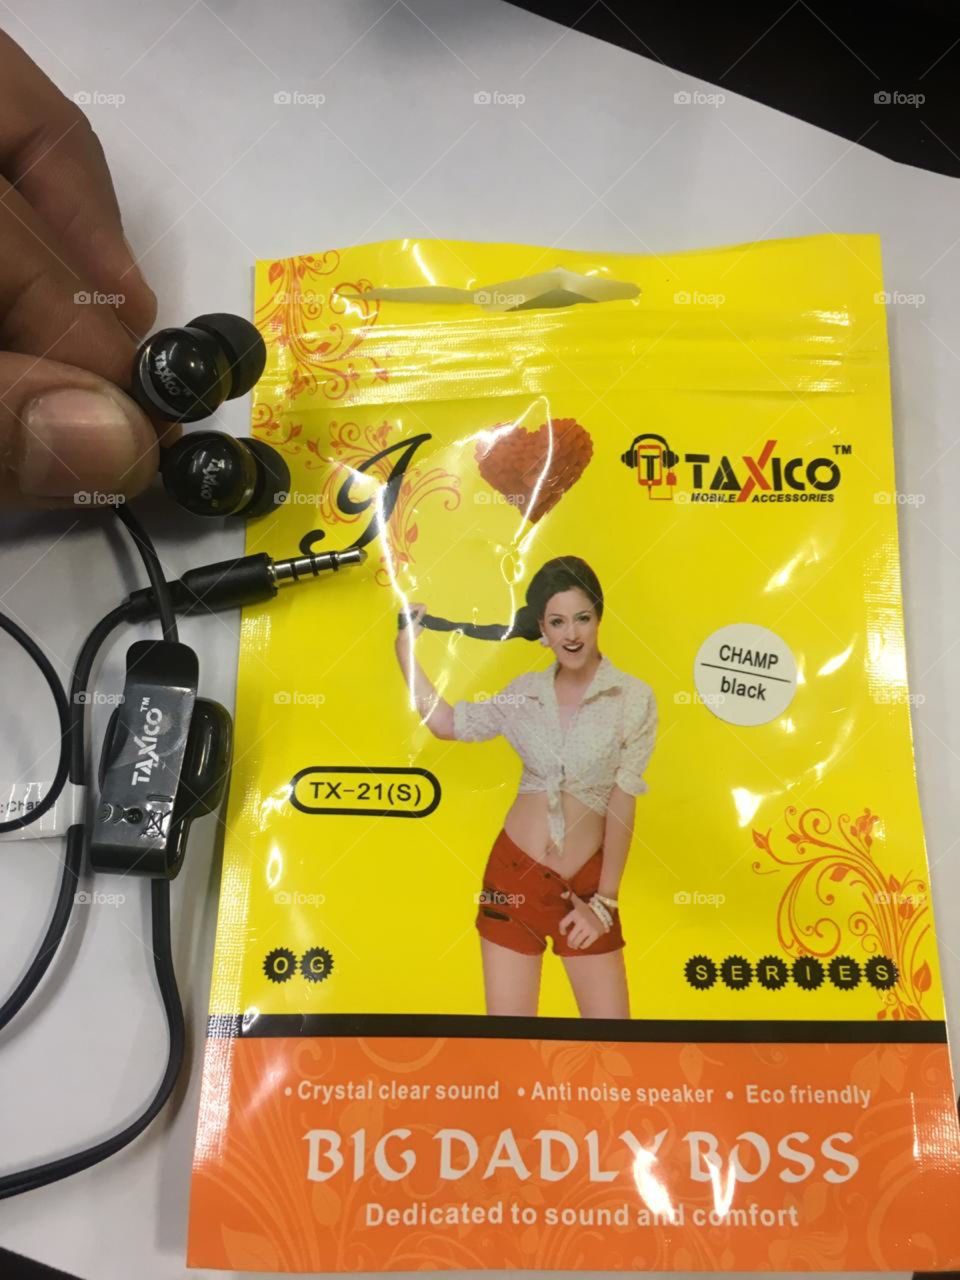 Good quality headphone for mobile